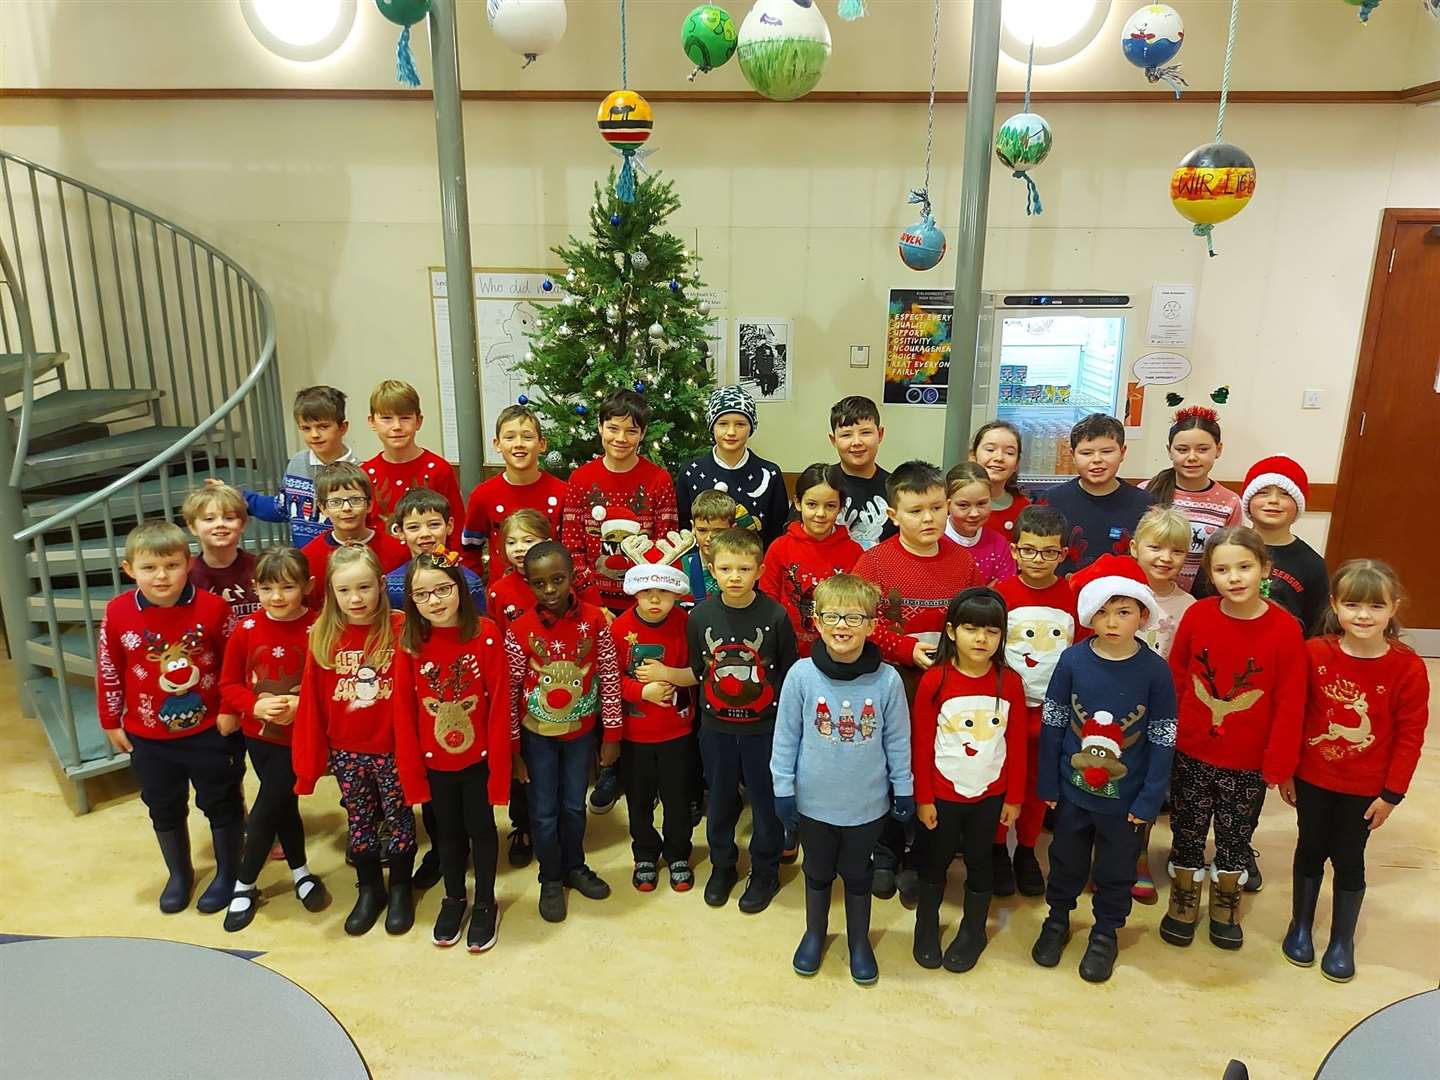 A Christmas Jumper Day raised money for Save the Children.